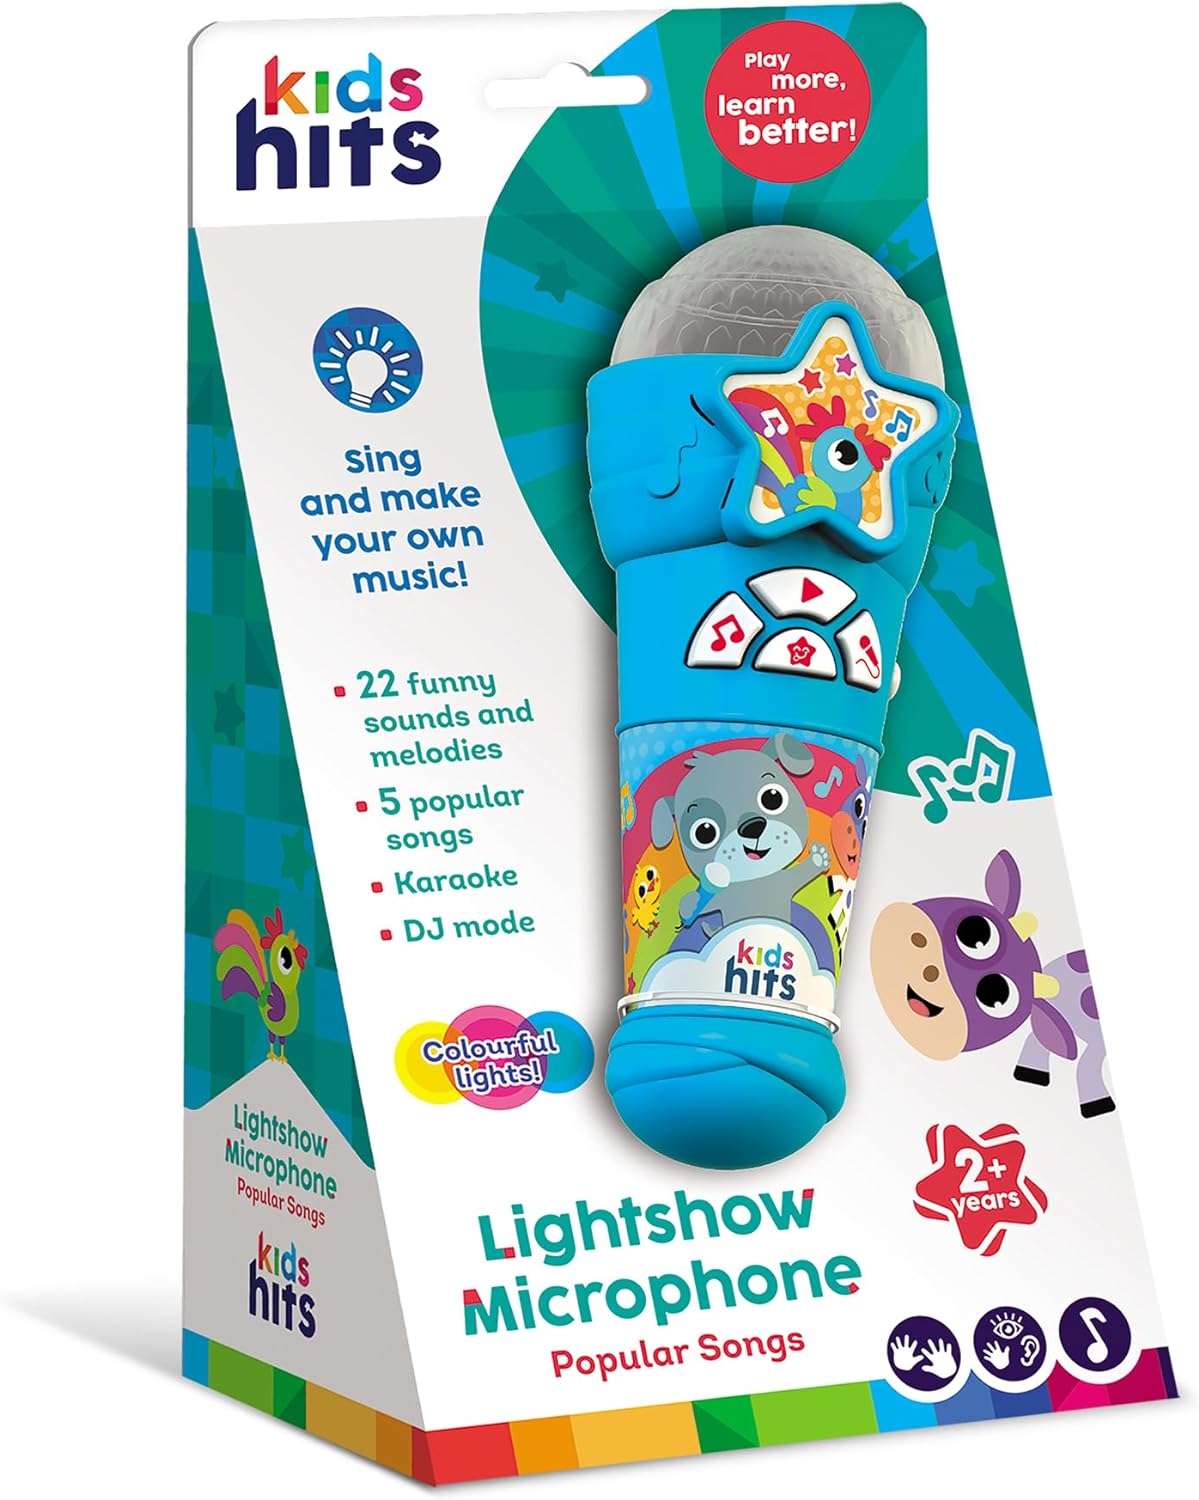 Kids Hits Light Show Microphone Play More,Learn Better!